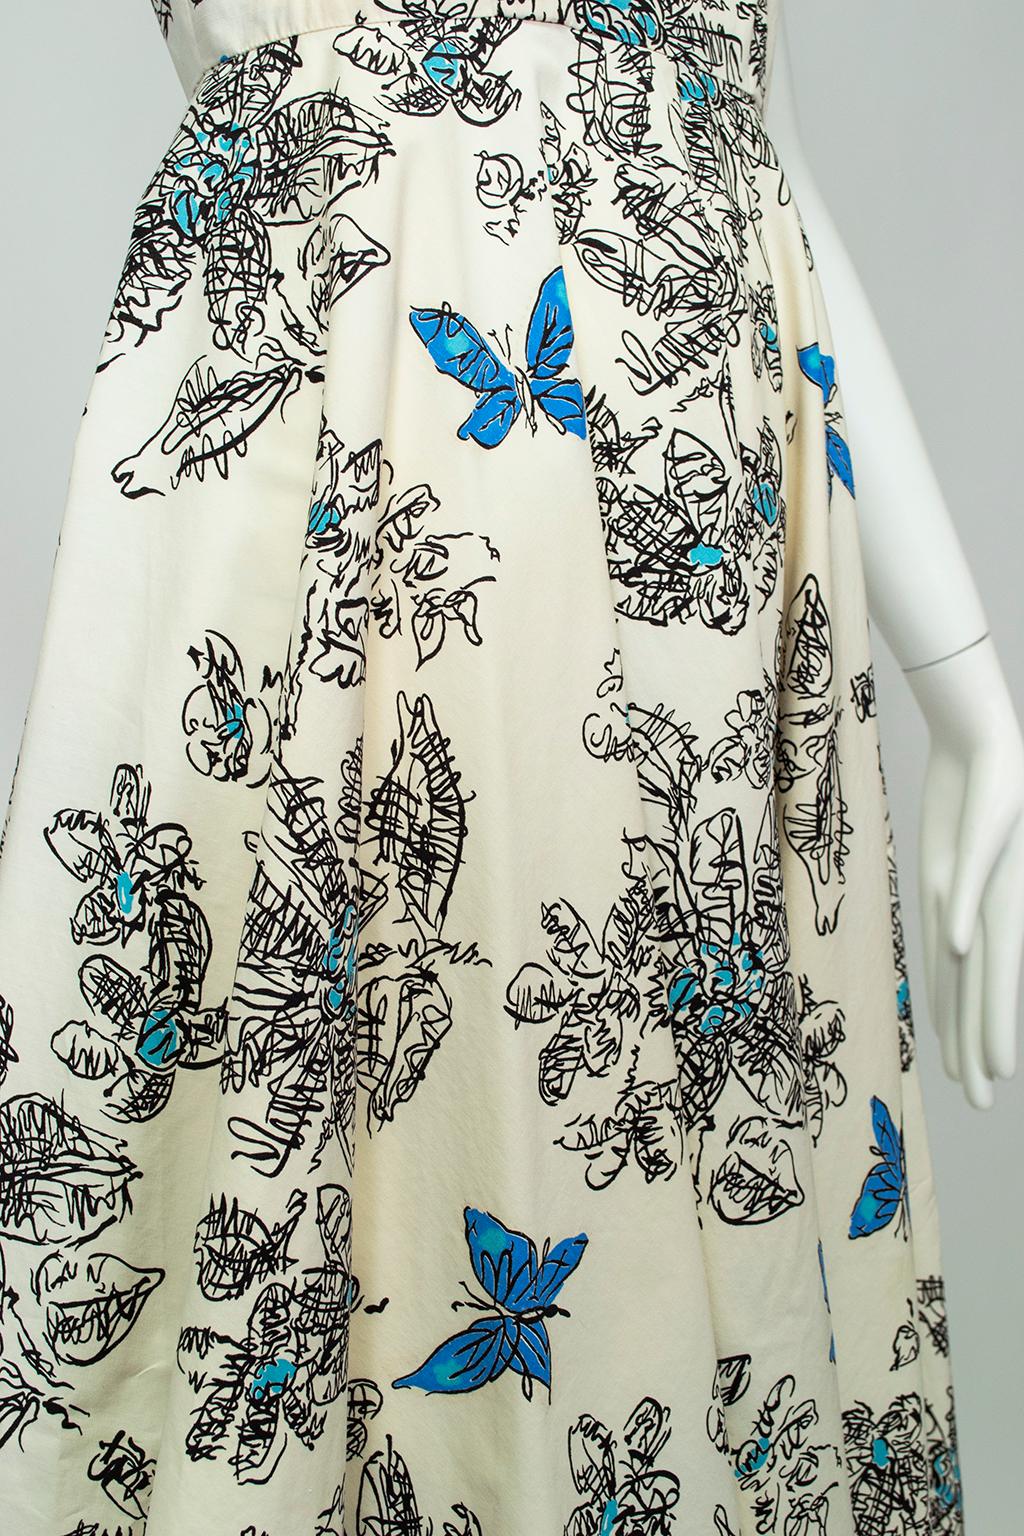 Blue Butterfly Sketch New Look Ballerina Sundress with Bib Points - XS, 1950s For Sale 3